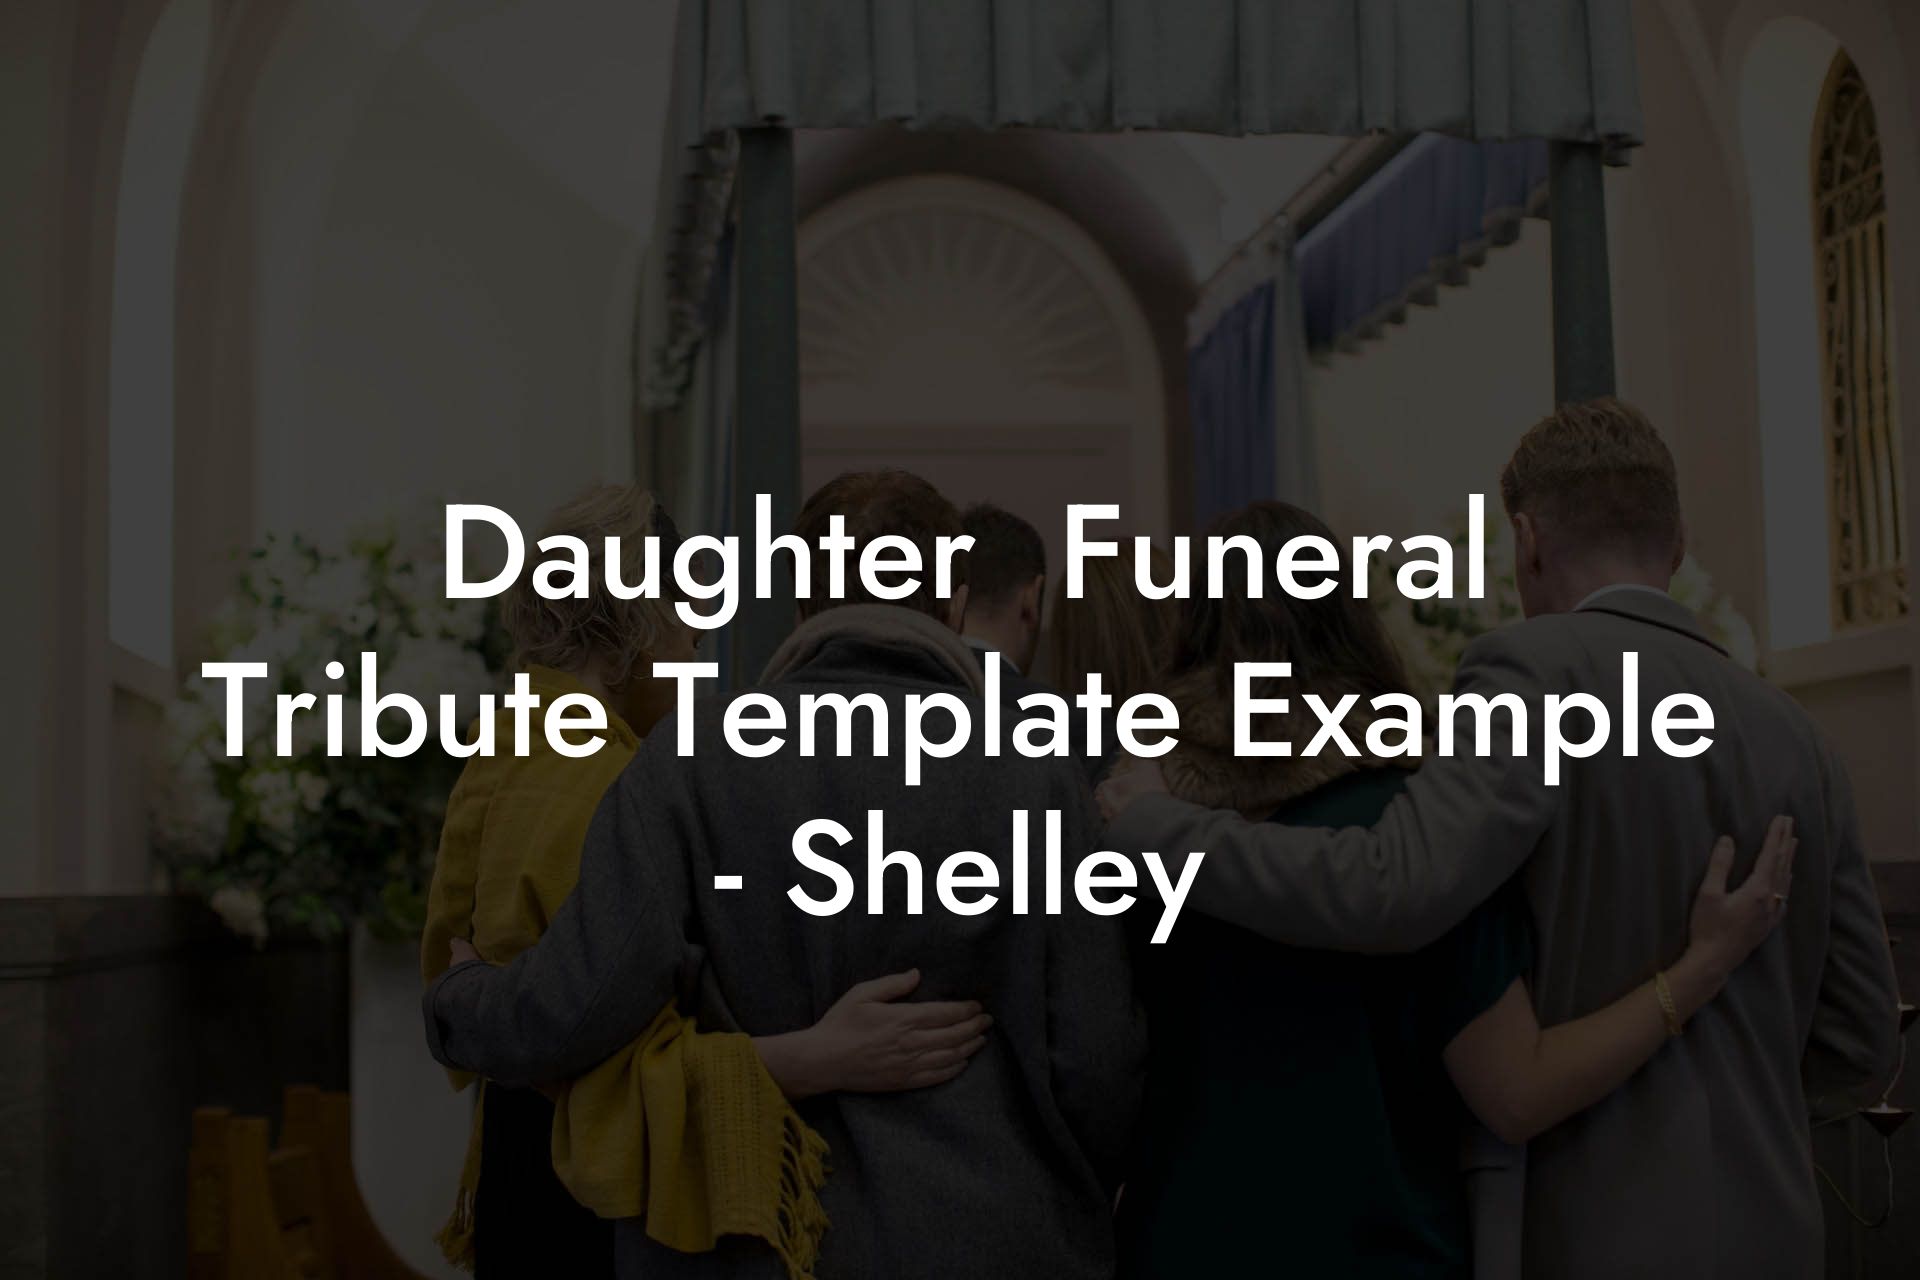 Daughter  Funeral Tribute Template Example - Shelley